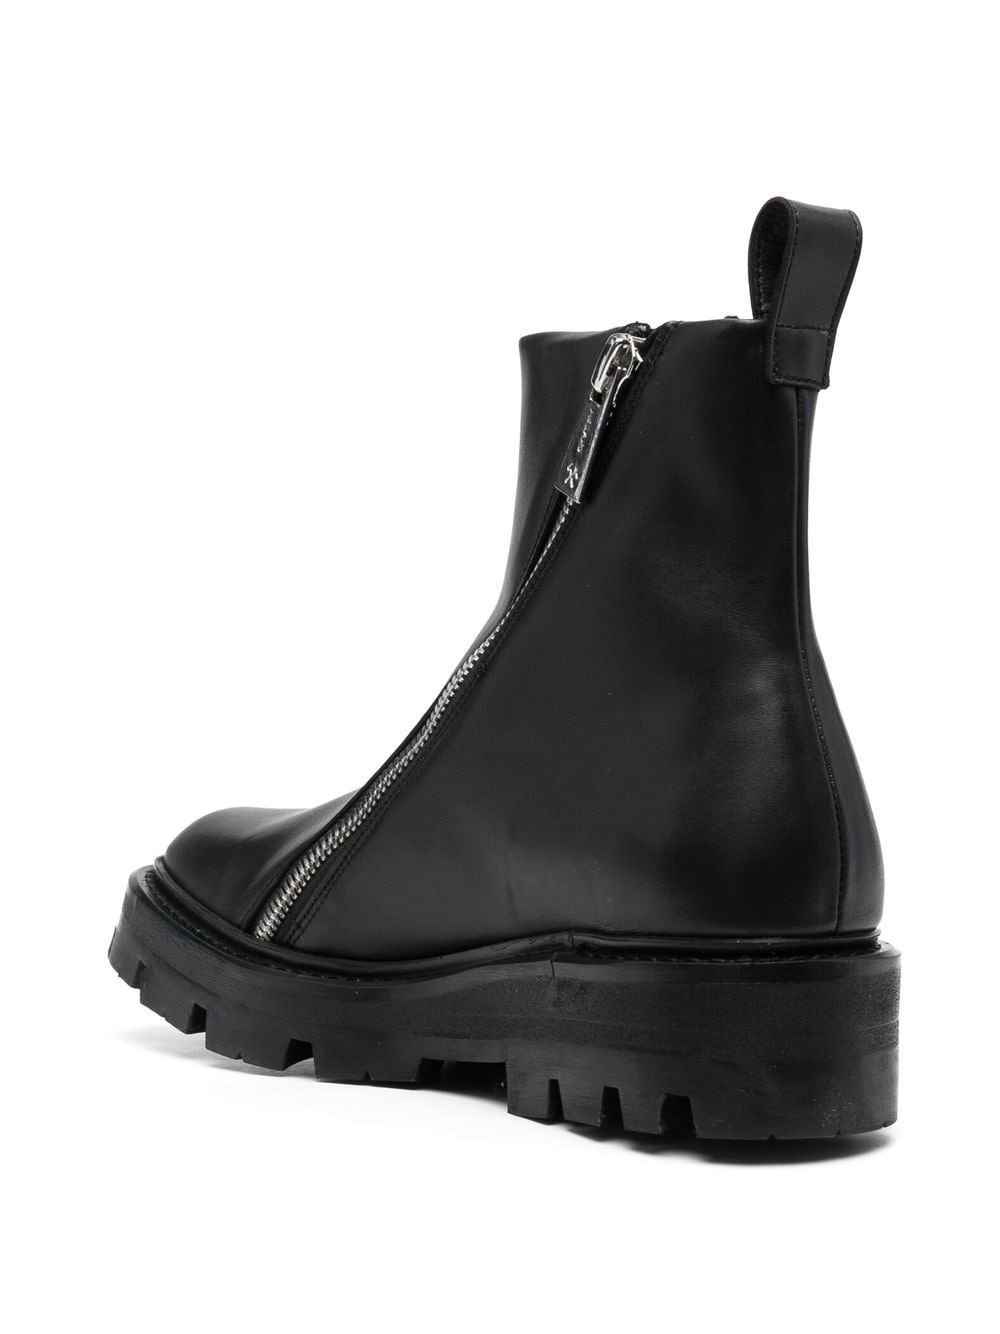 GmbH double-zip Ankle Boots - Farfetch